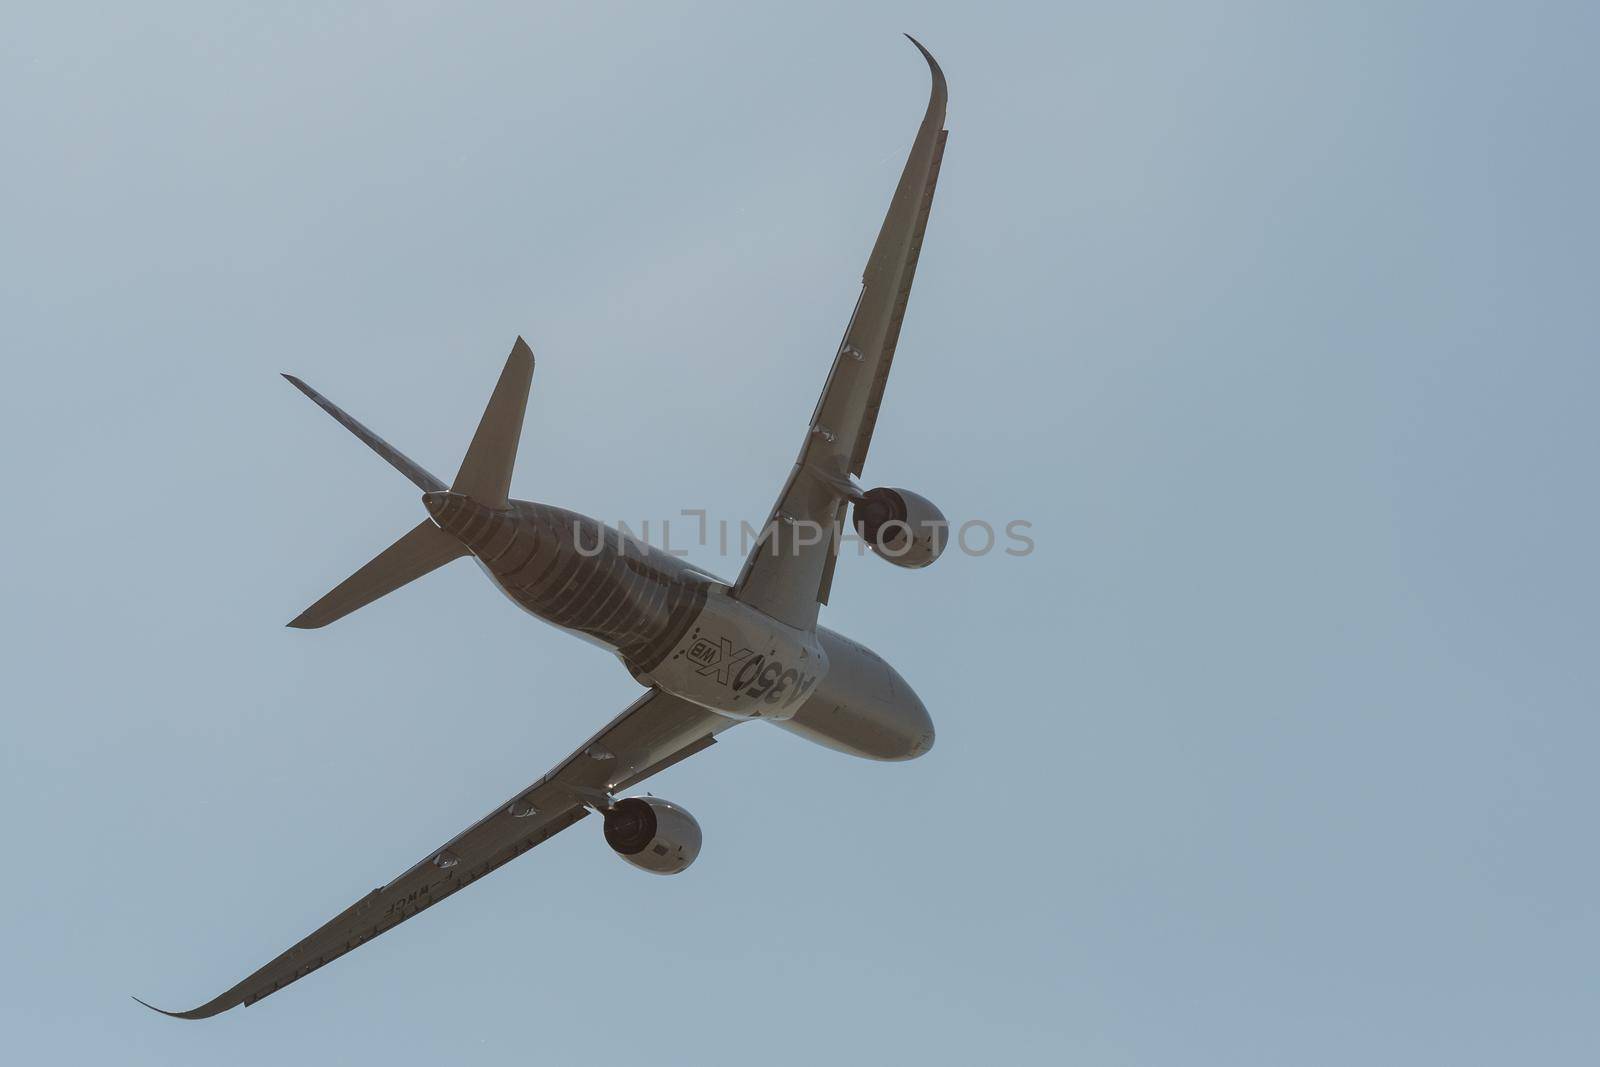 August 30, 2019. Zhukovsky, Russia. long-range wide-body twin-engine passenger aircraft Airbus A350-900 XWB Airbus Industrie at the International Aviation and Space Salon MAKS 2019.